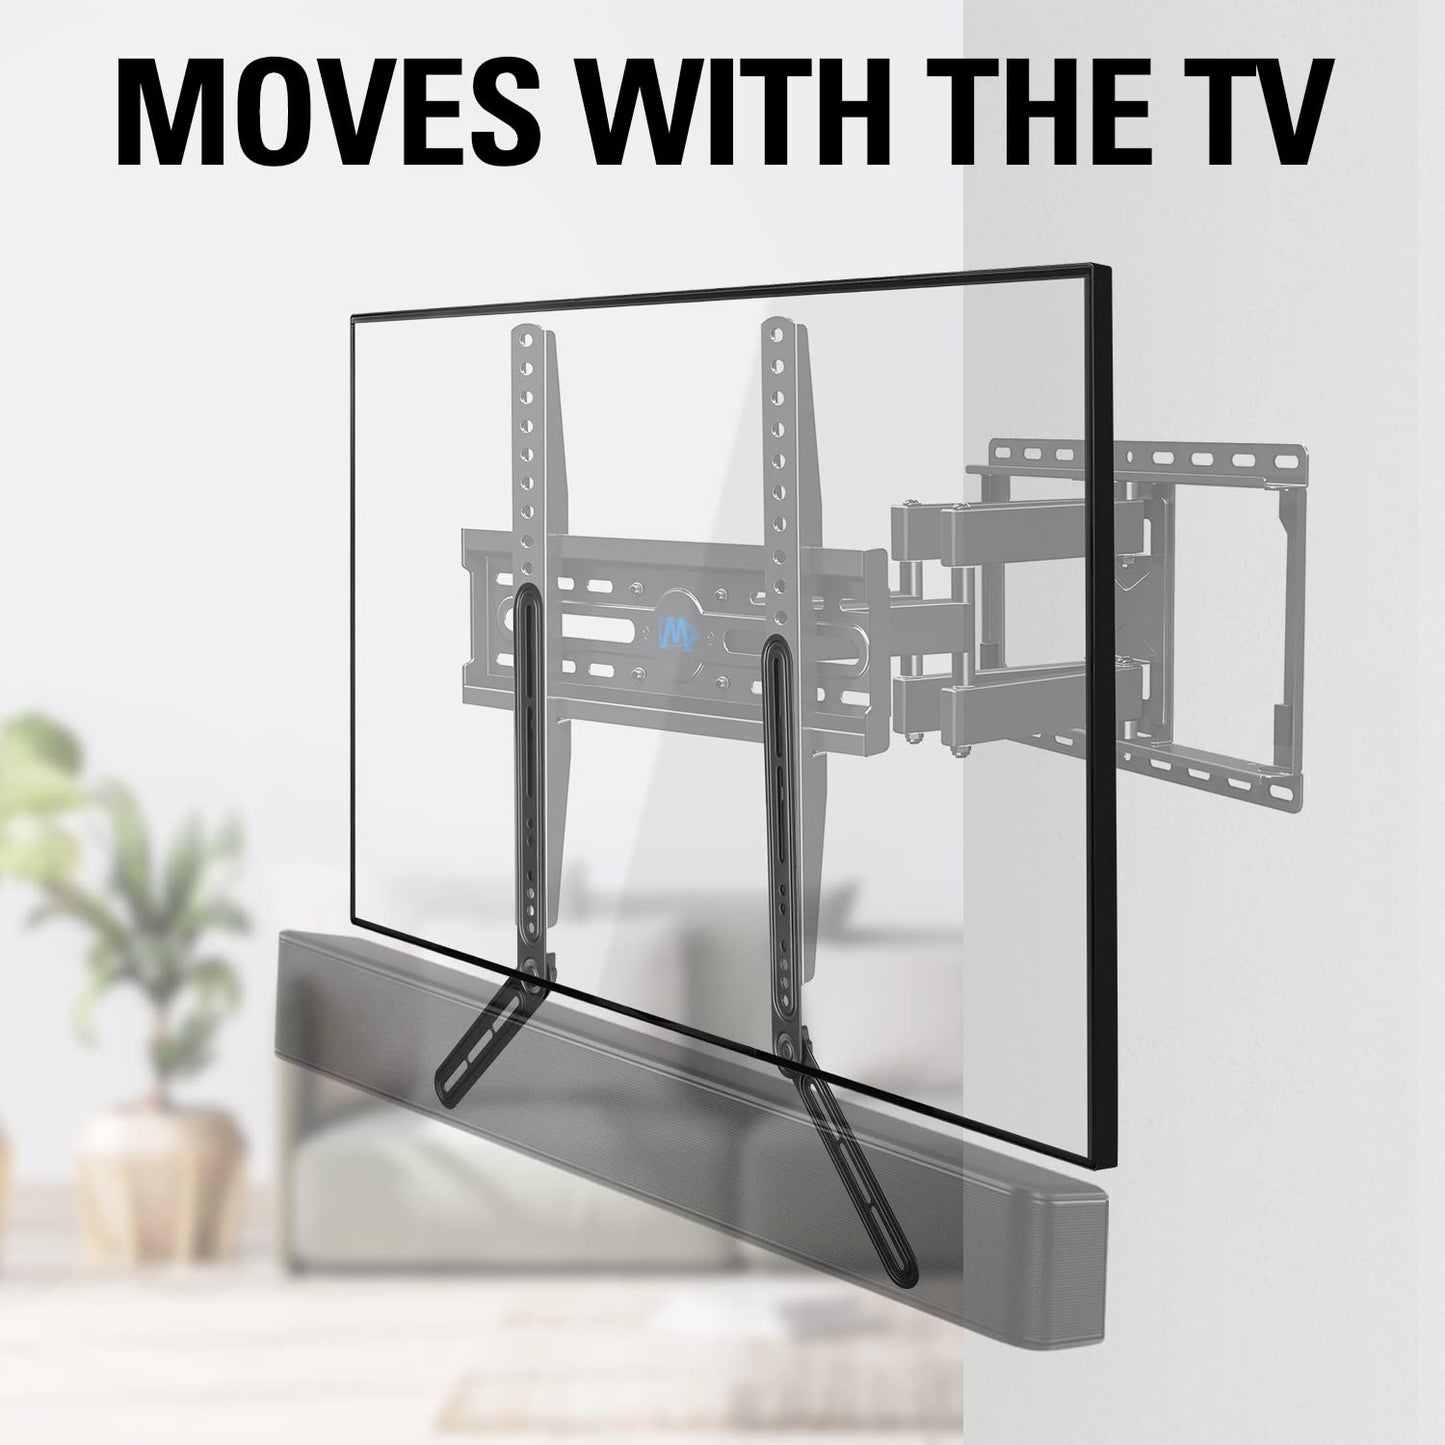 Mounting Dream Soundbar Mount Sound Bar TV Bracket for Mounting Above or Under TV Fits Most of Sound Bars Up to 15 Lbs, with Detachable Long Extension Plates MD5420